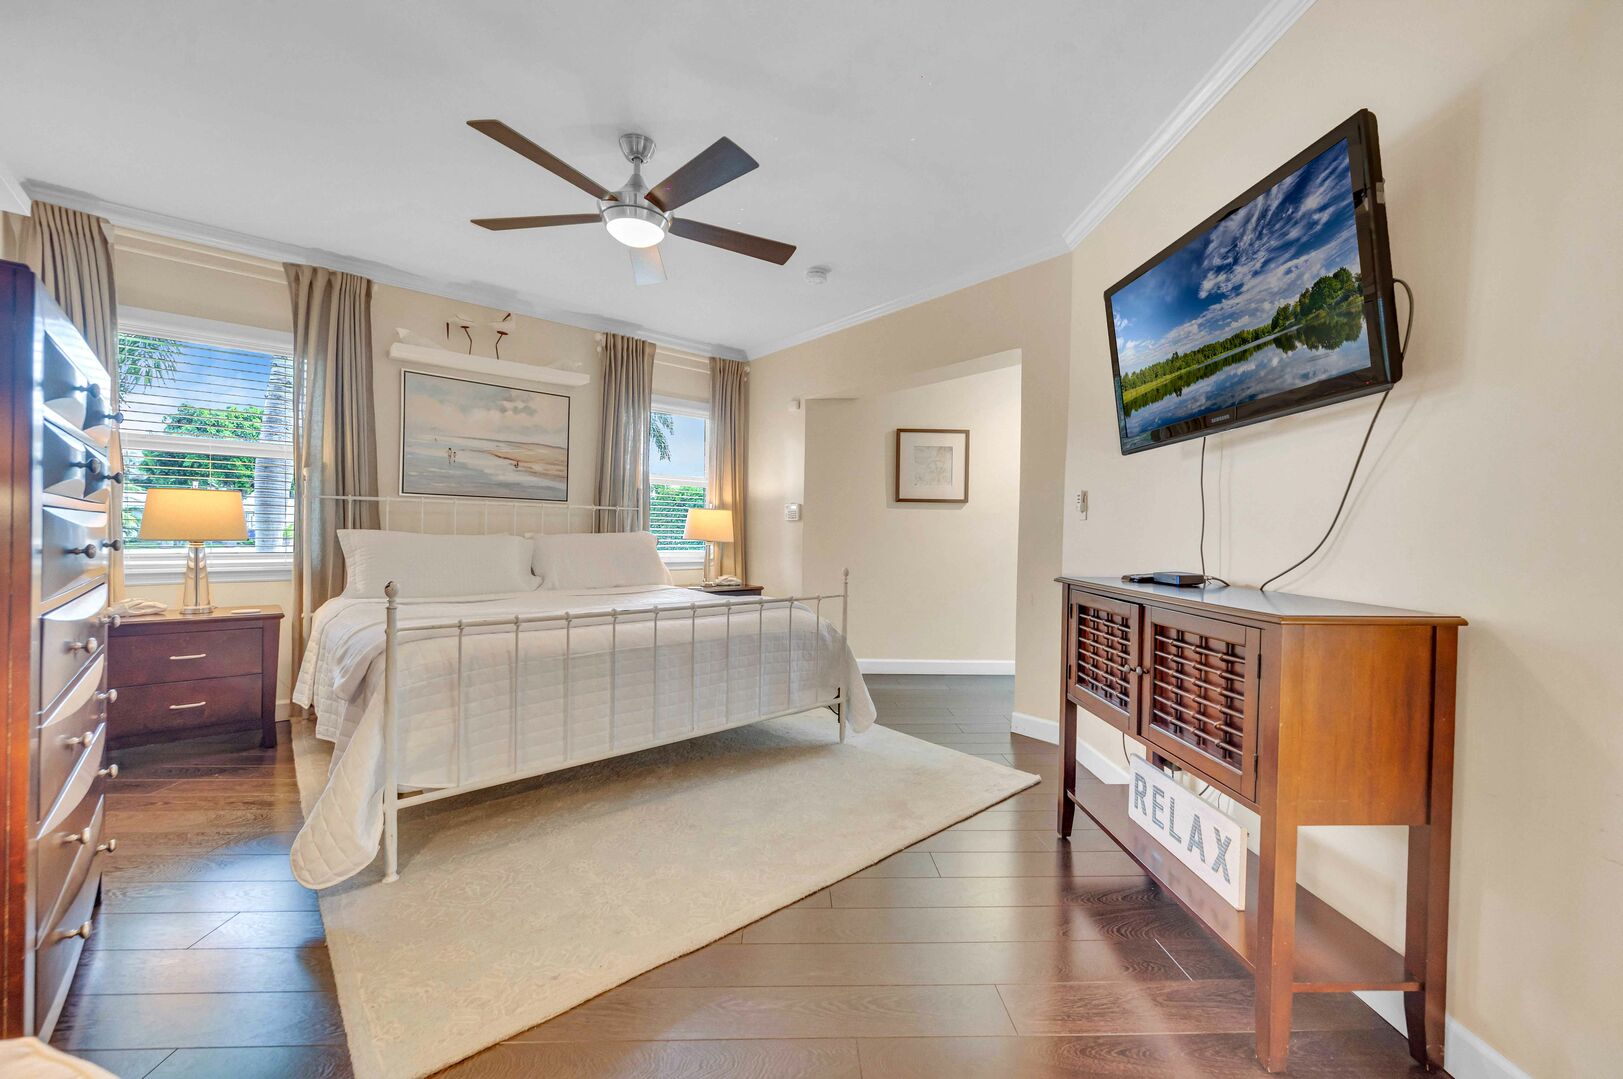 Spacious Master bedroom, featuring a king-sized bed and a wall-mounted Smart TV.